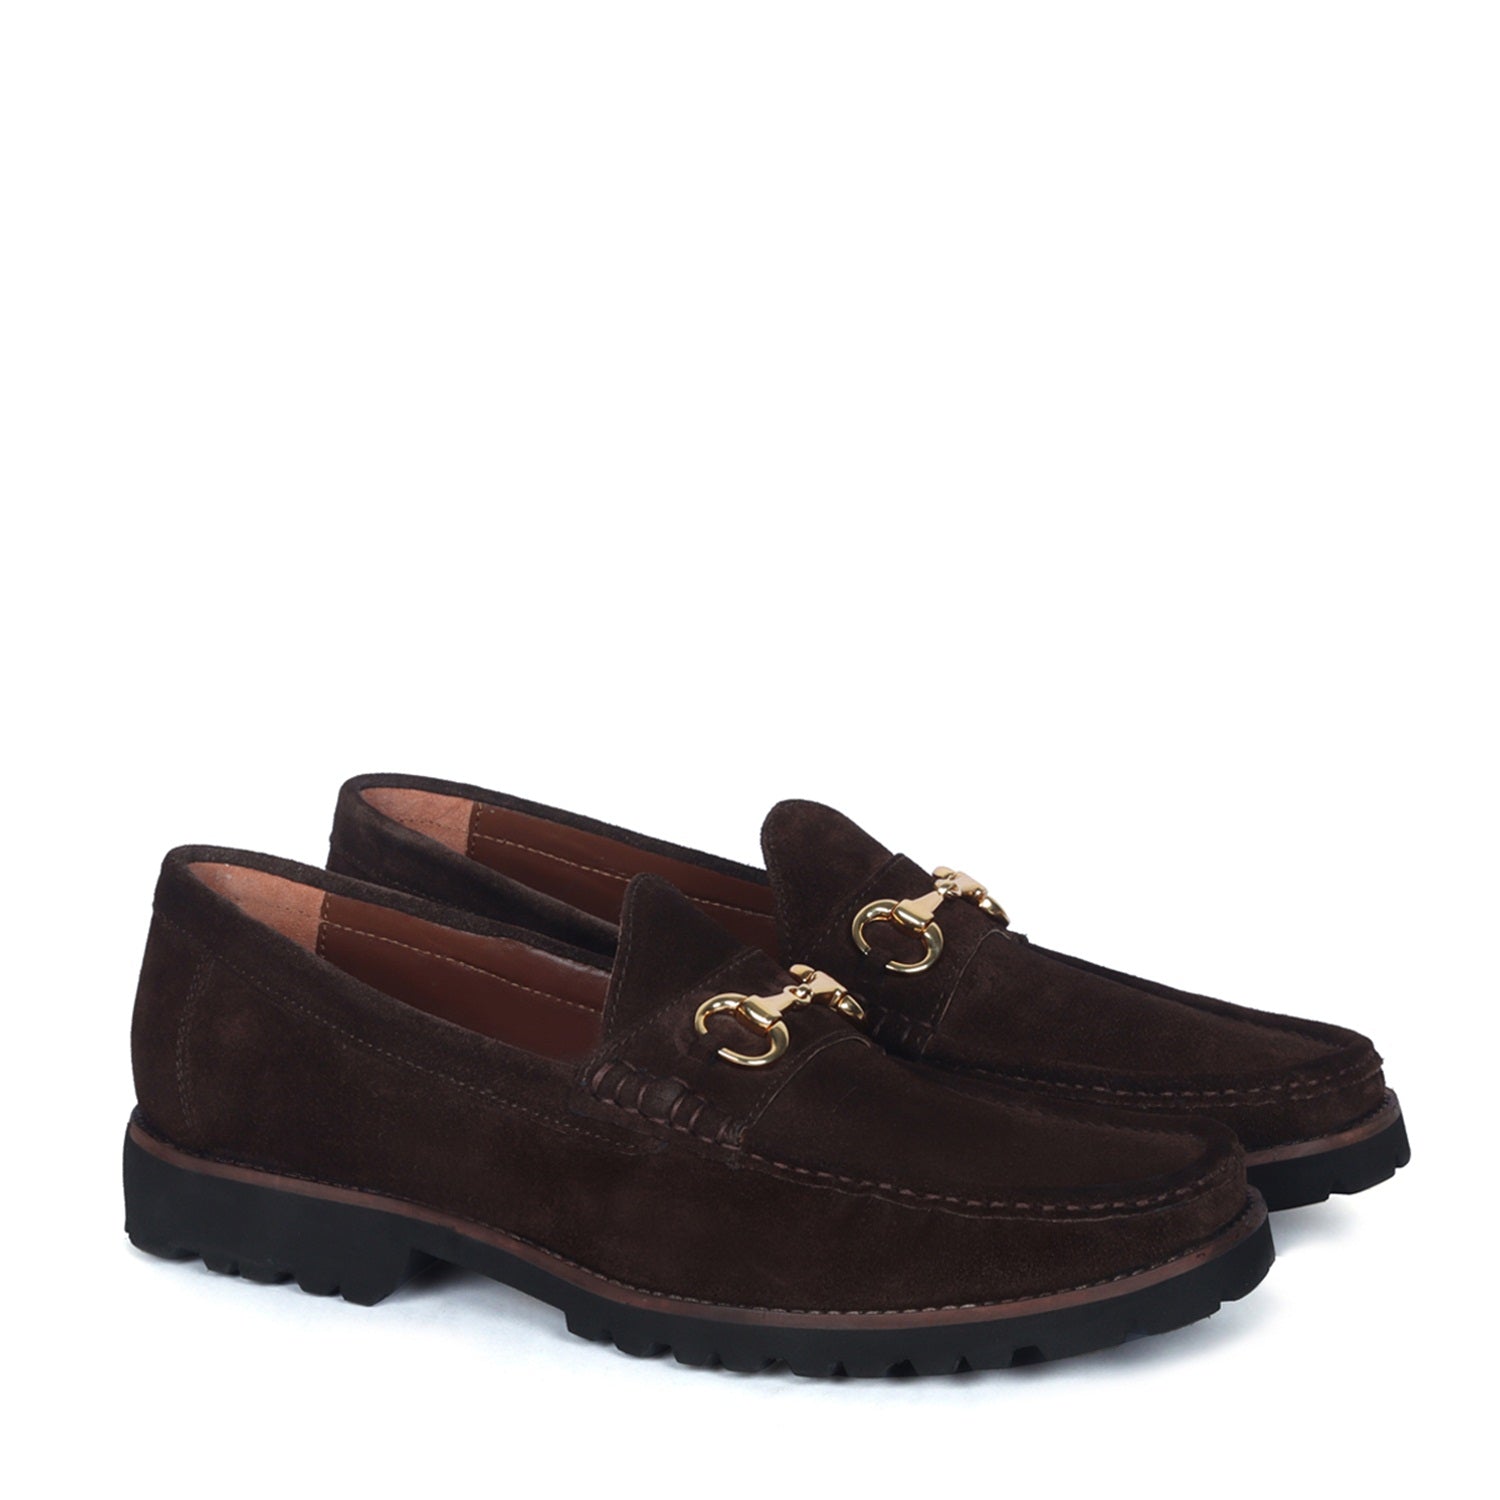 Dark Brown Chunky Sole in Suede Leather With Horse-bit Buckle